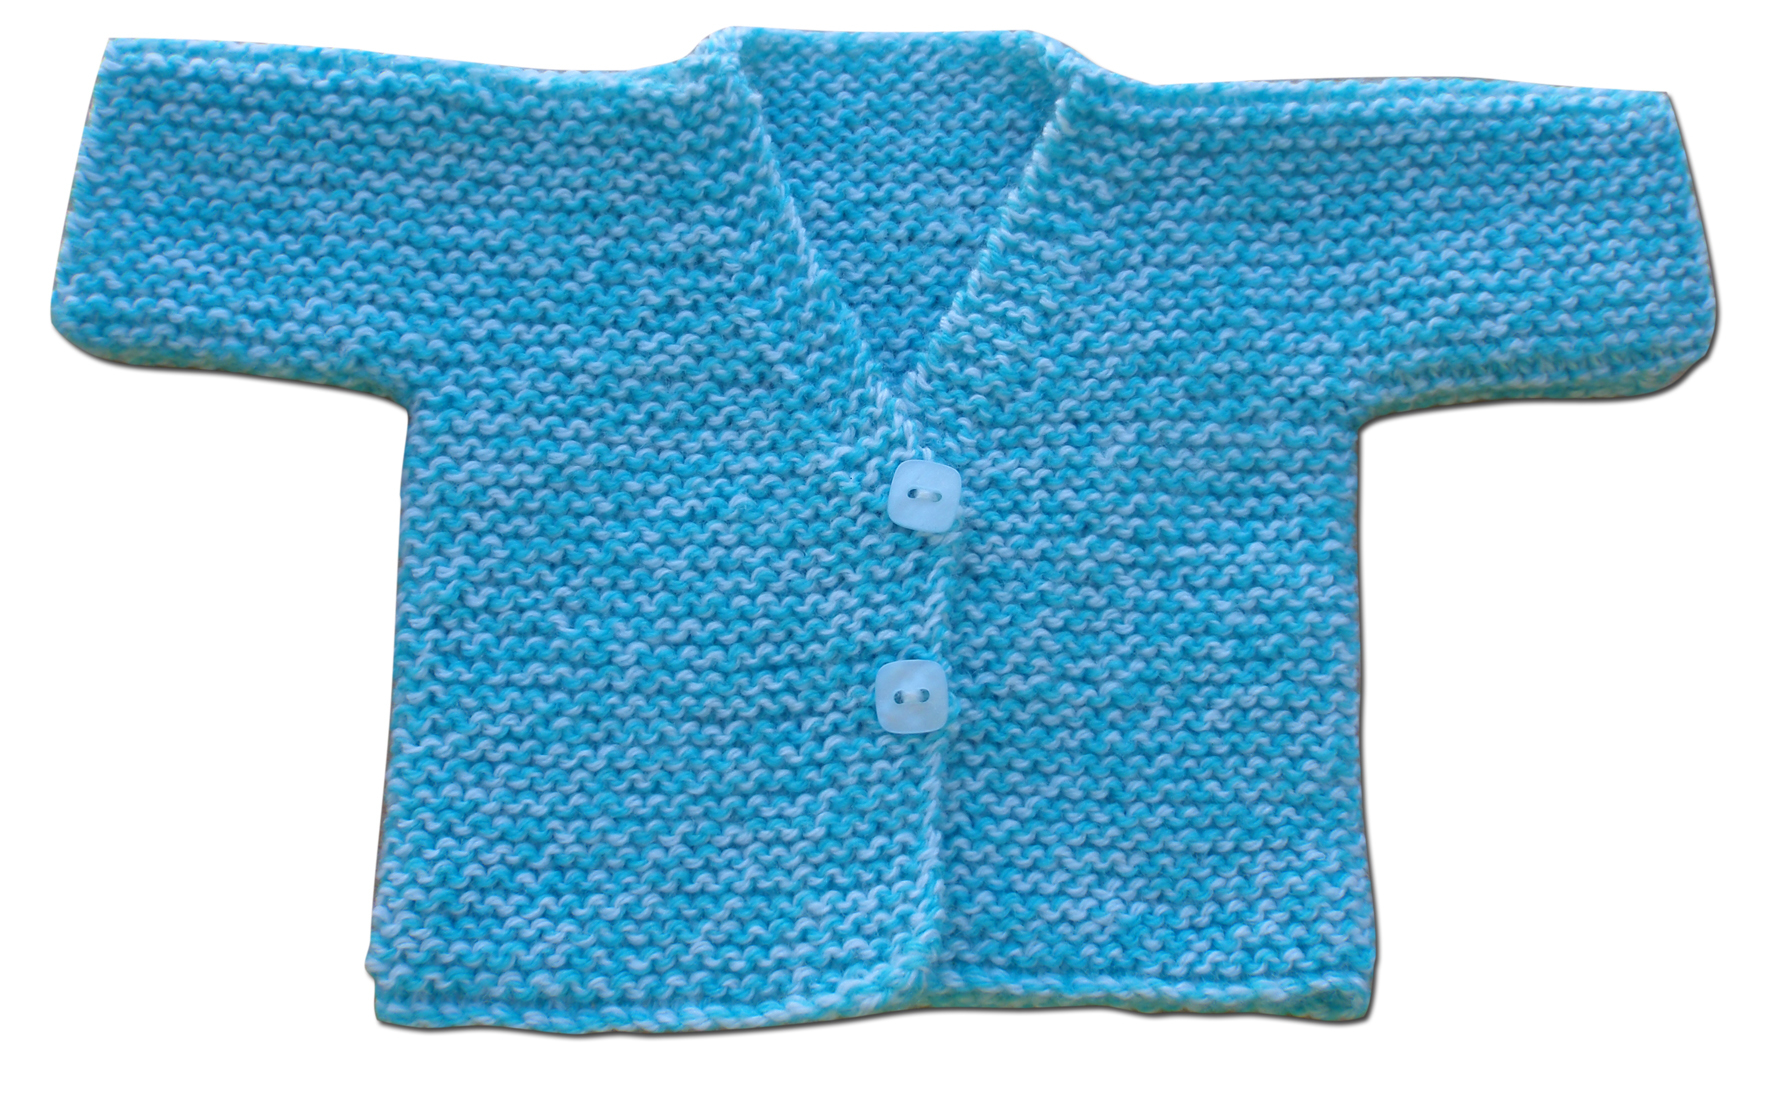 Free Baby Knitting Patterns 8 Ply Help Our Babies